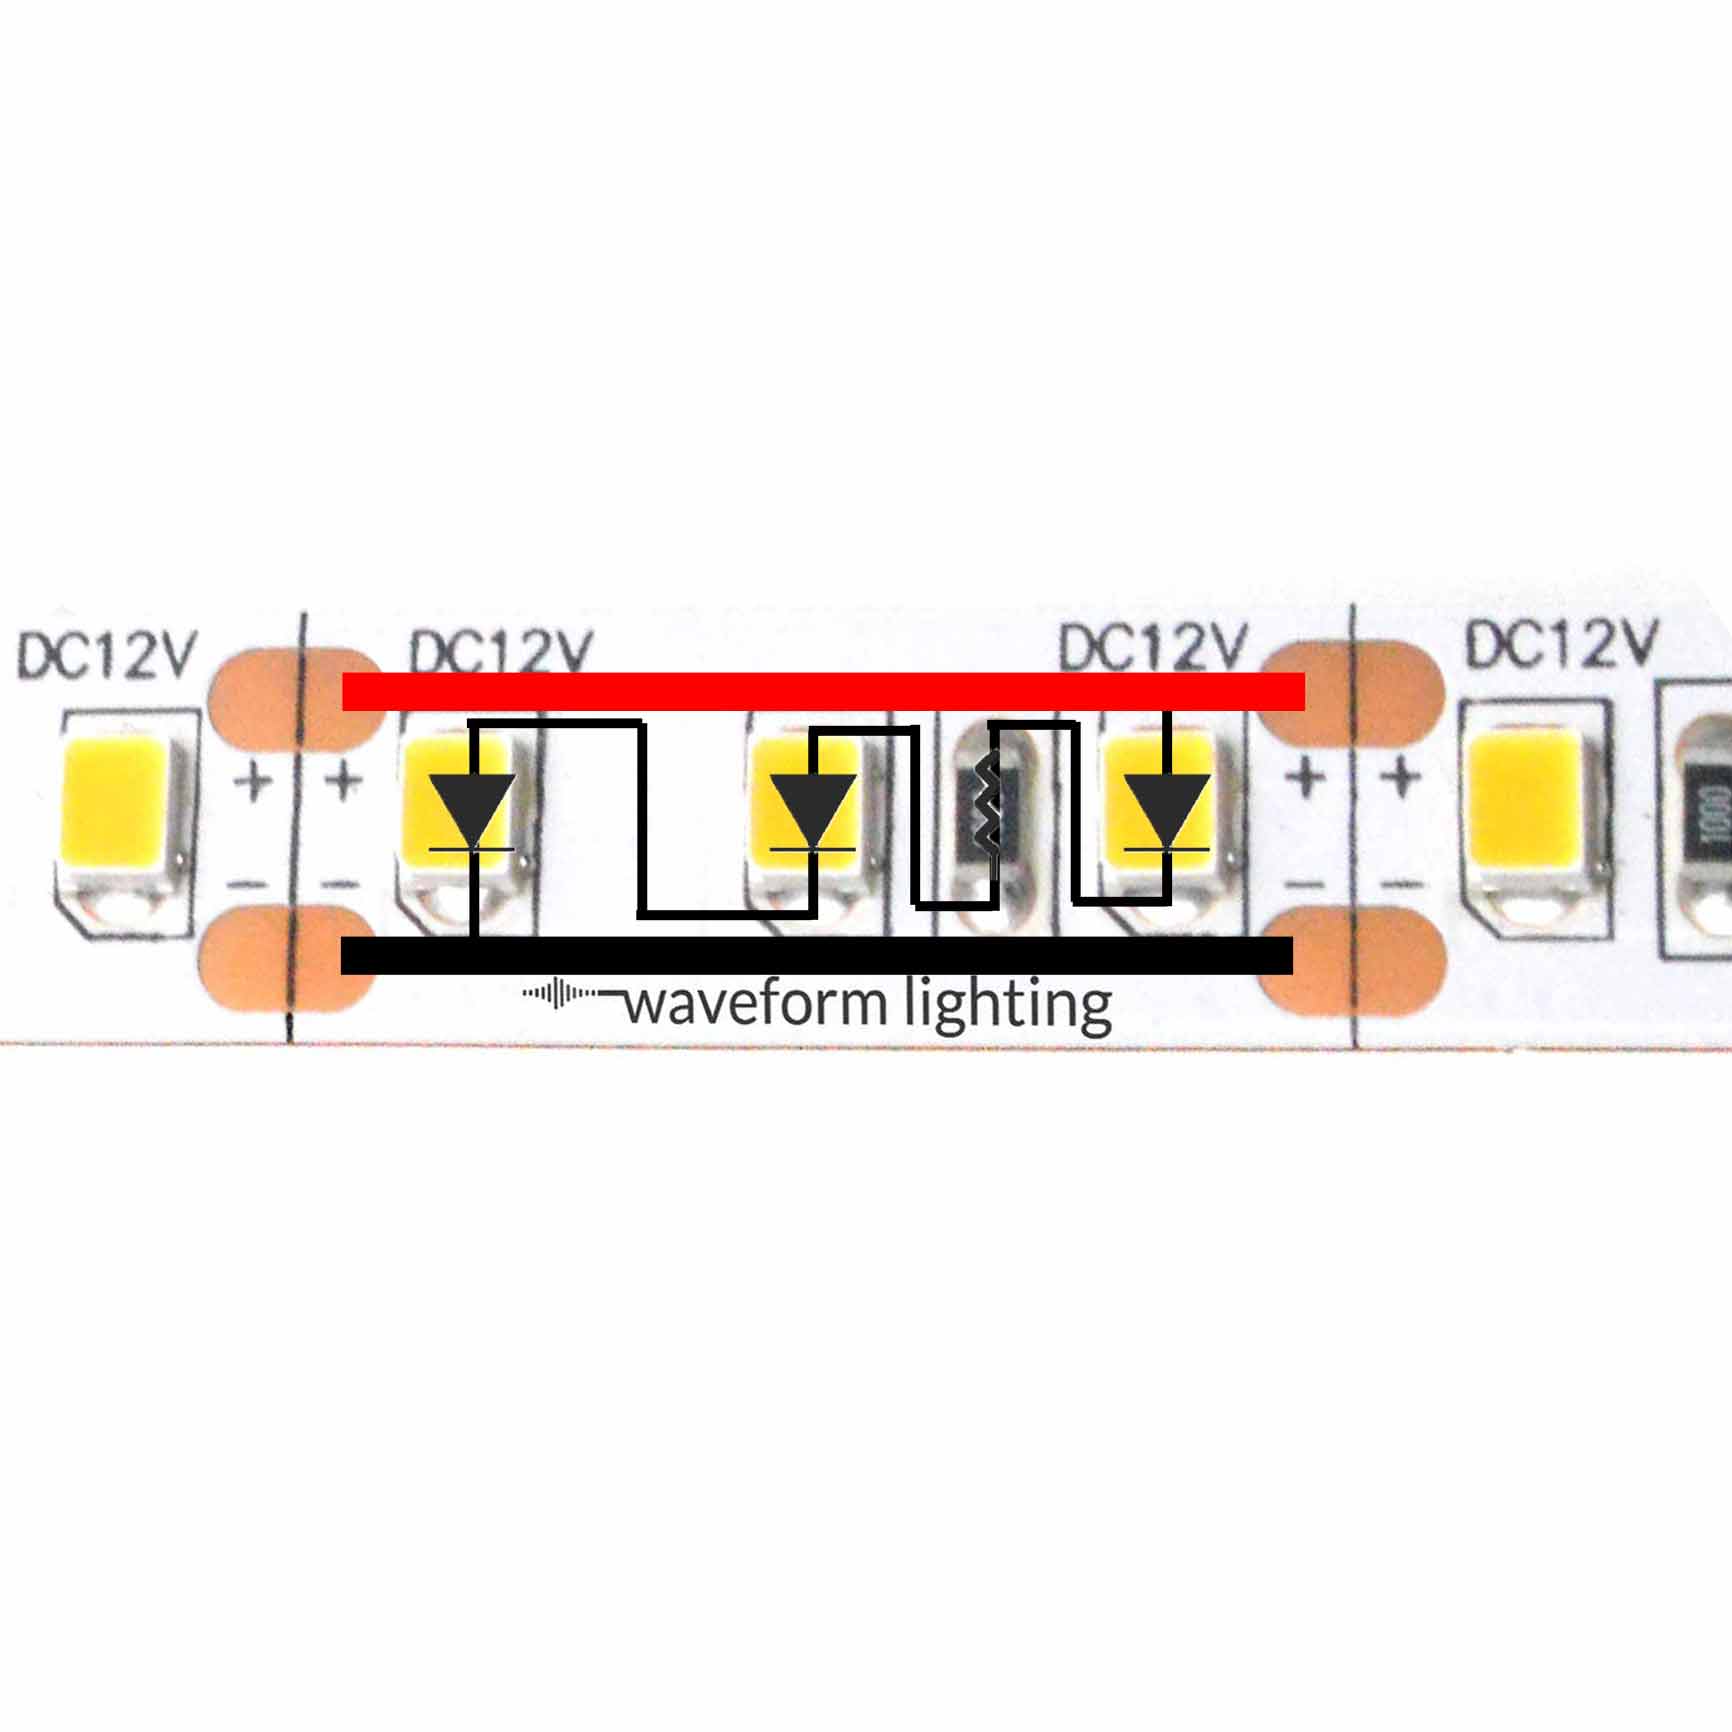 12V 10W LED -- does this require current limiting circuitry or